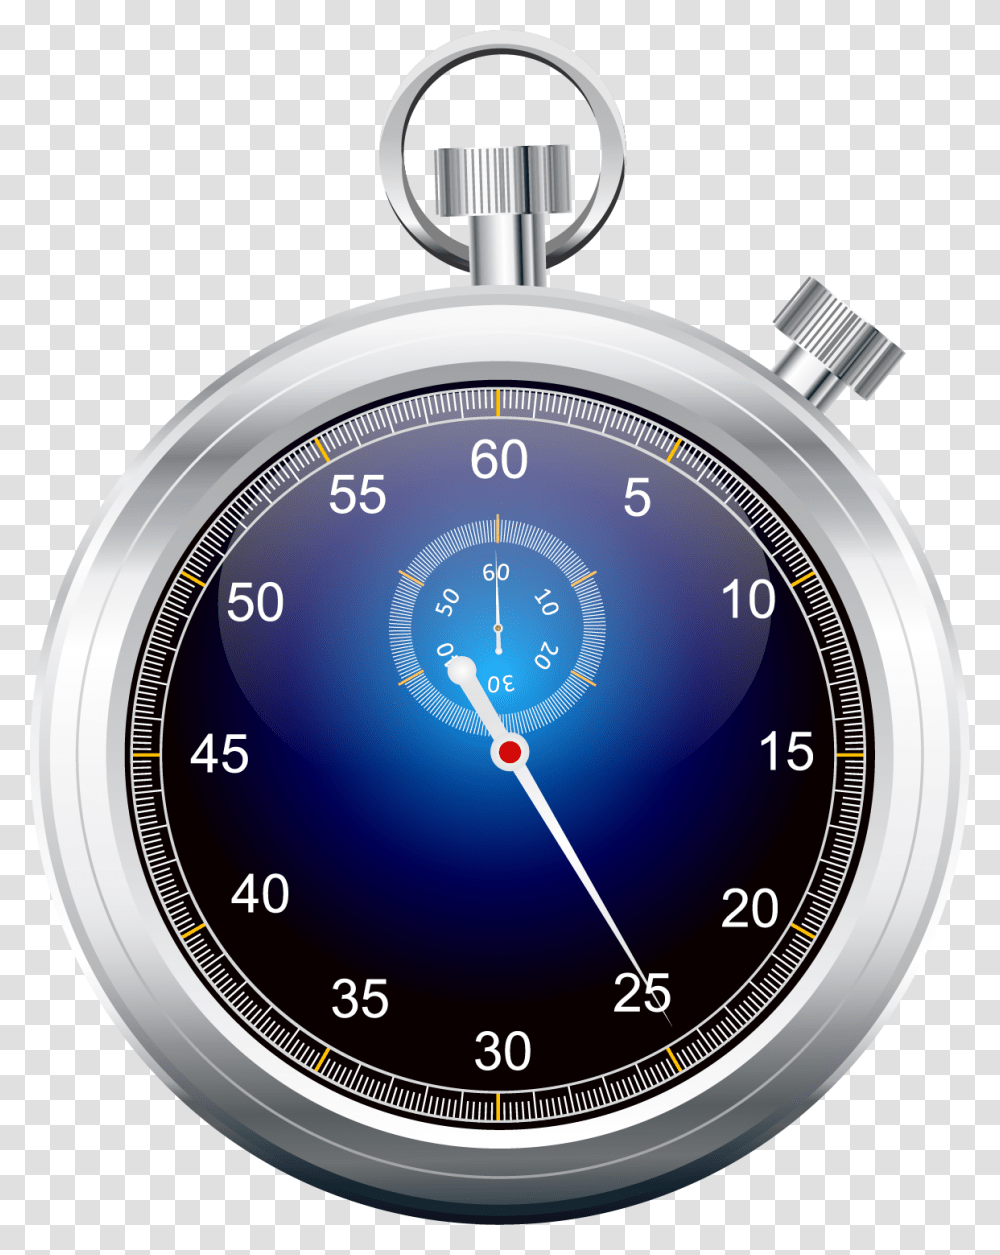 Stop Watch Download Image Stopwatch, Clock Tower, Architecture, Building, Gauge Transparent Png